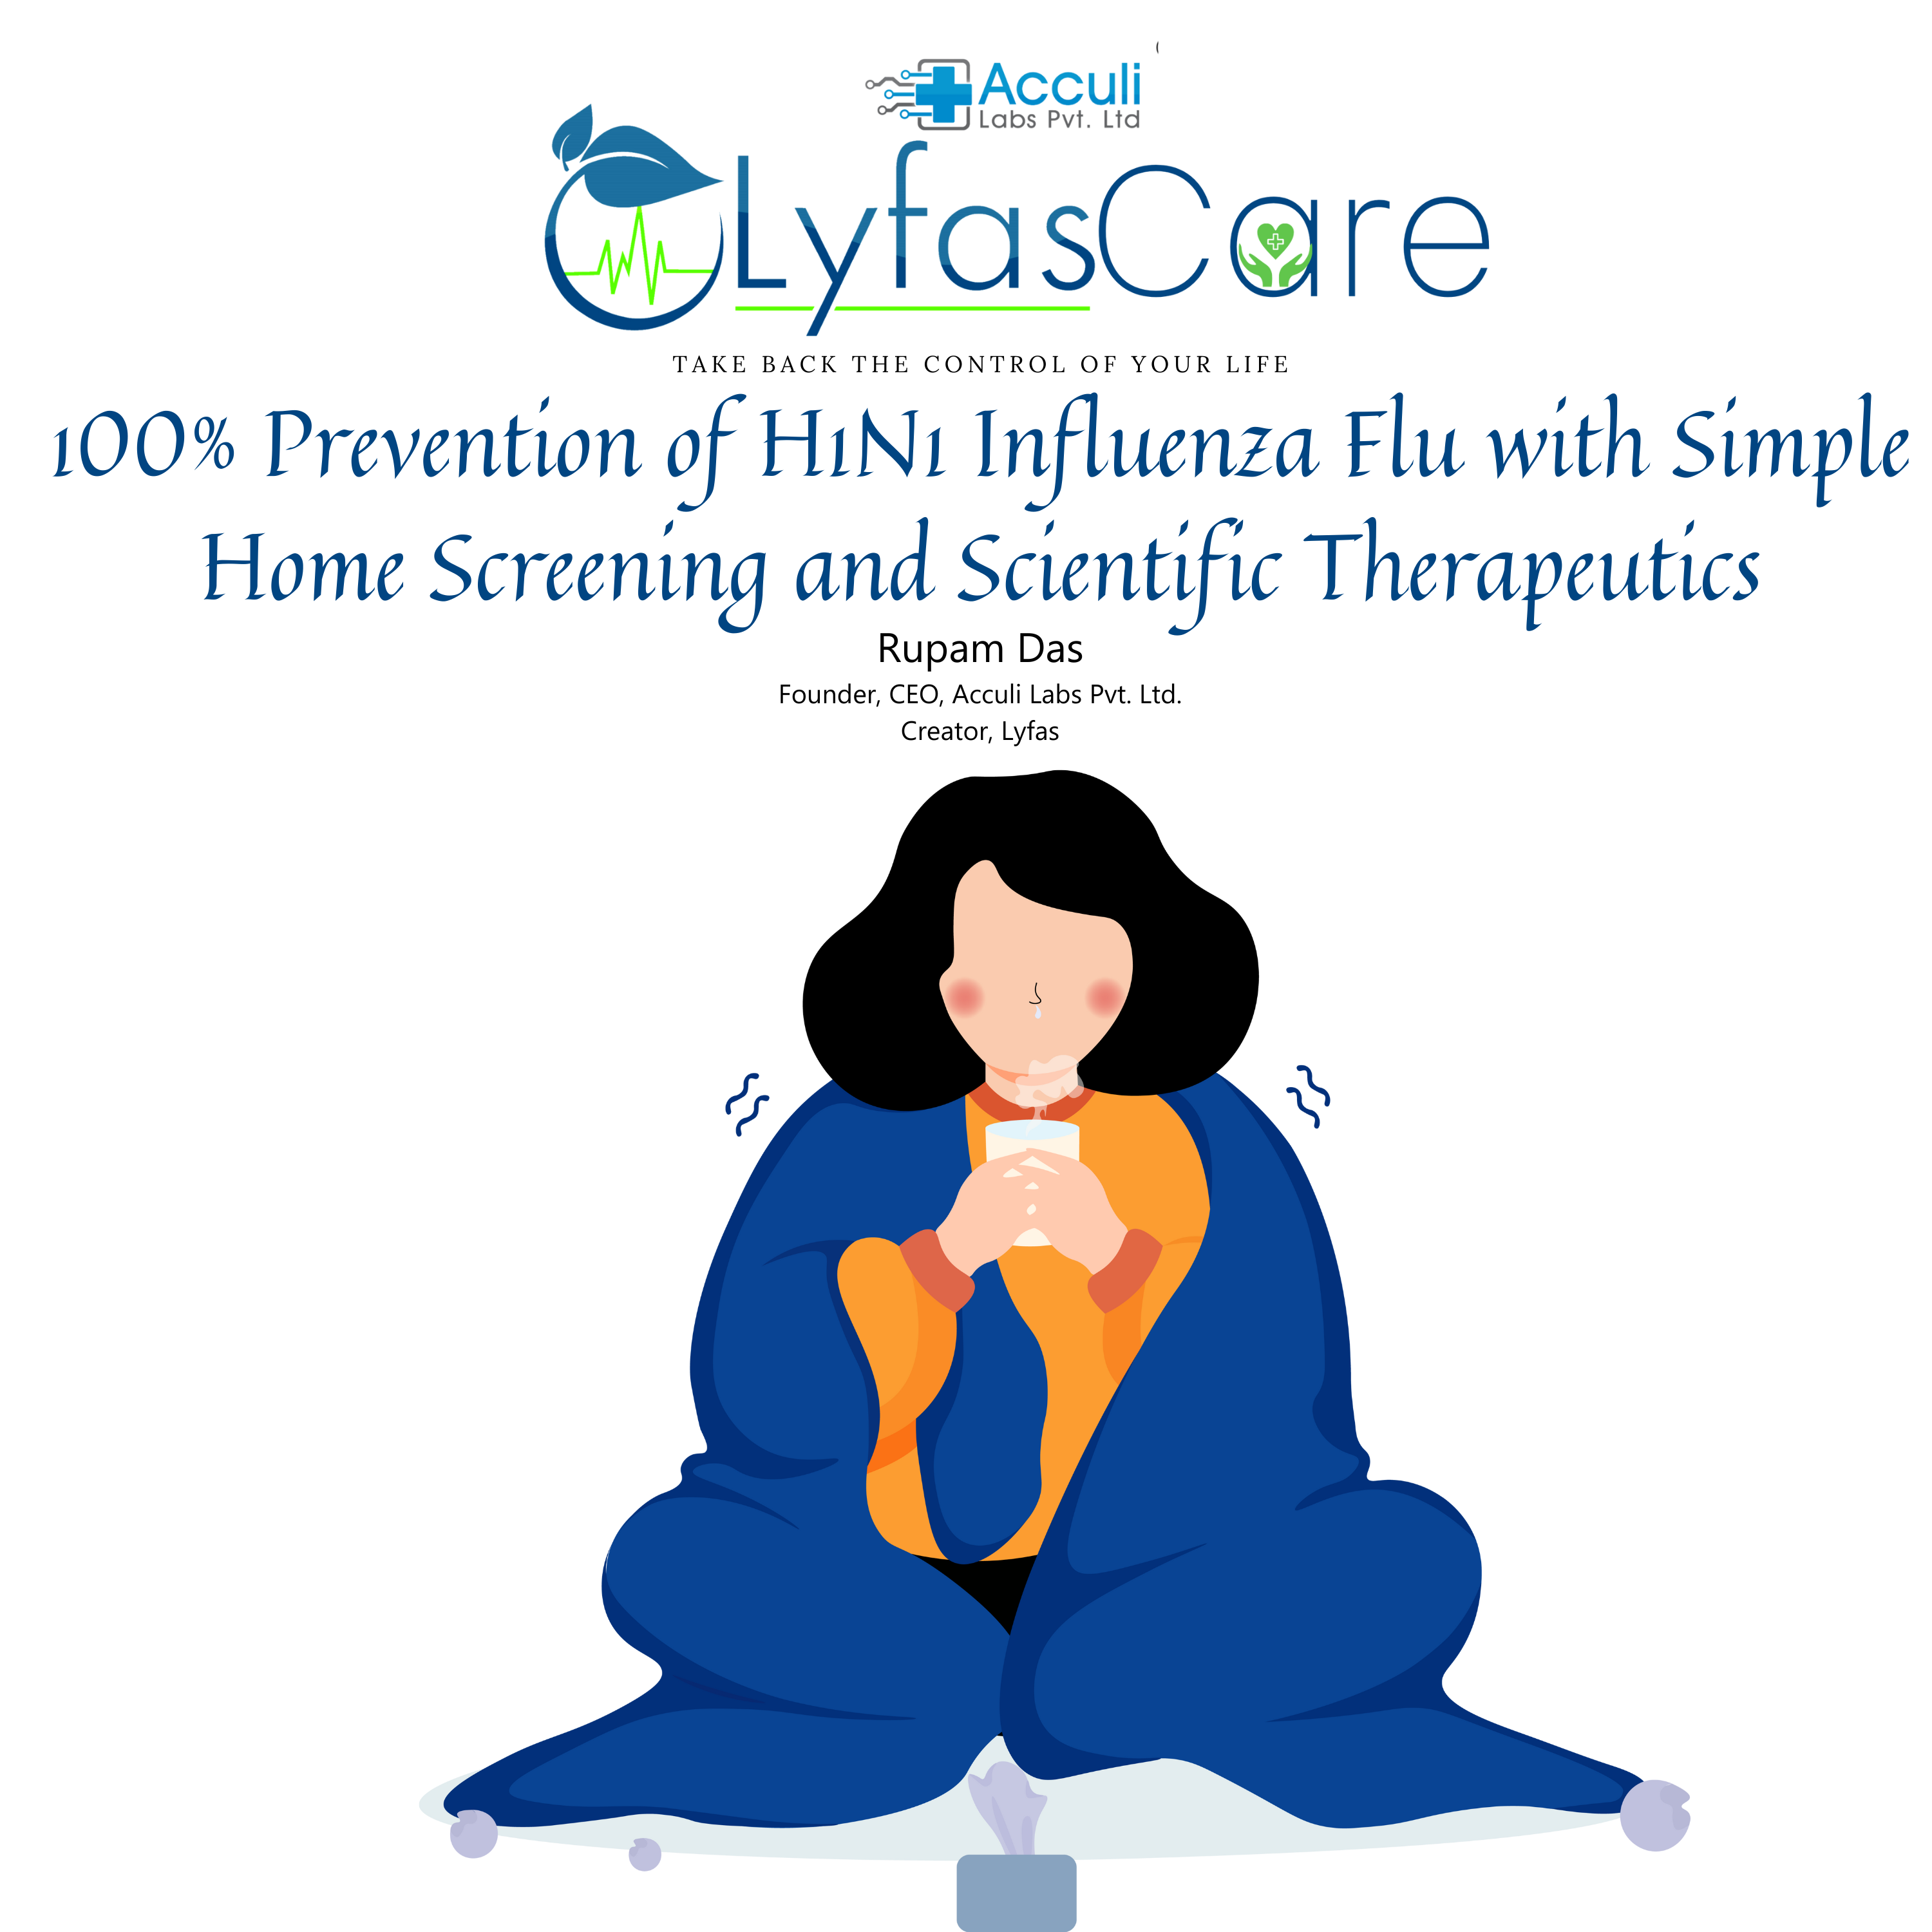 100% Prevention of H1N1 Influenza Flu with Simple Home Screening and Scientific Therapeutics